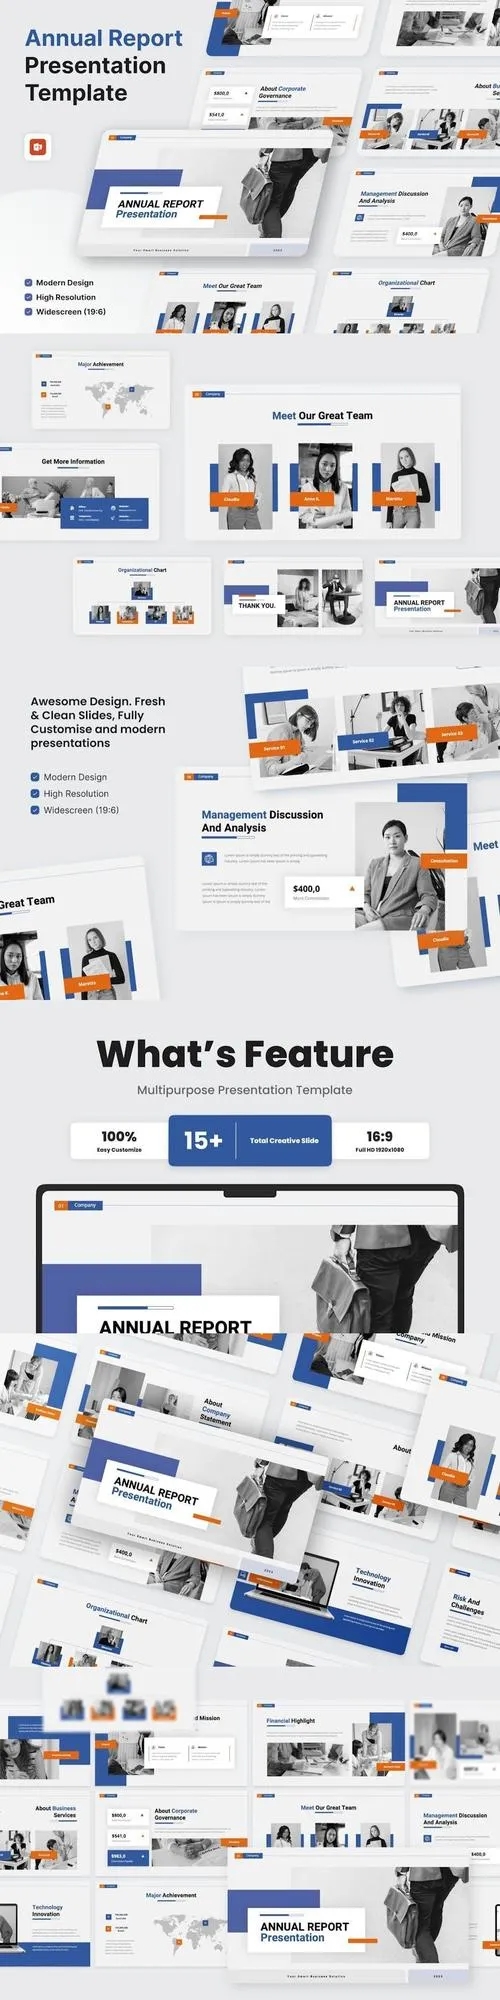 Annual Report PowerPoint Template